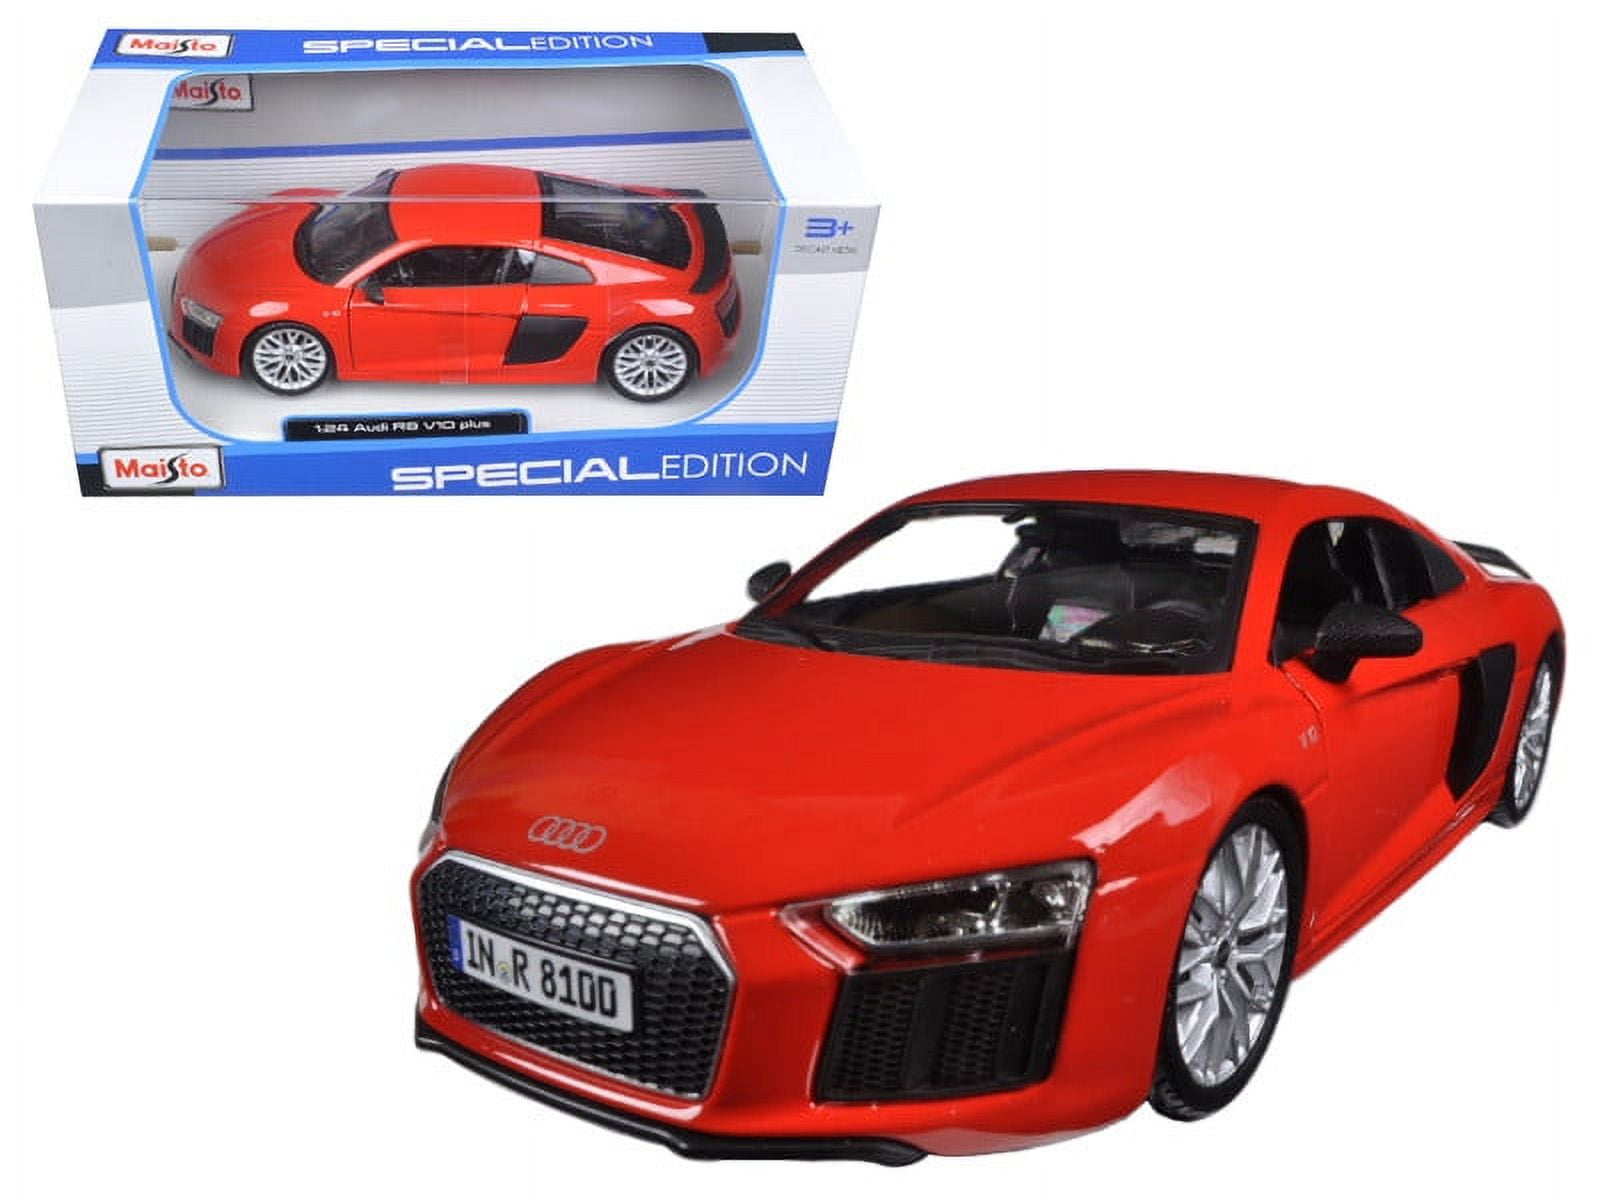 Maisto 31513gry Audi R8 V10 Plus Special Edition Diecast Model Car For 1-24 Scale, Grey